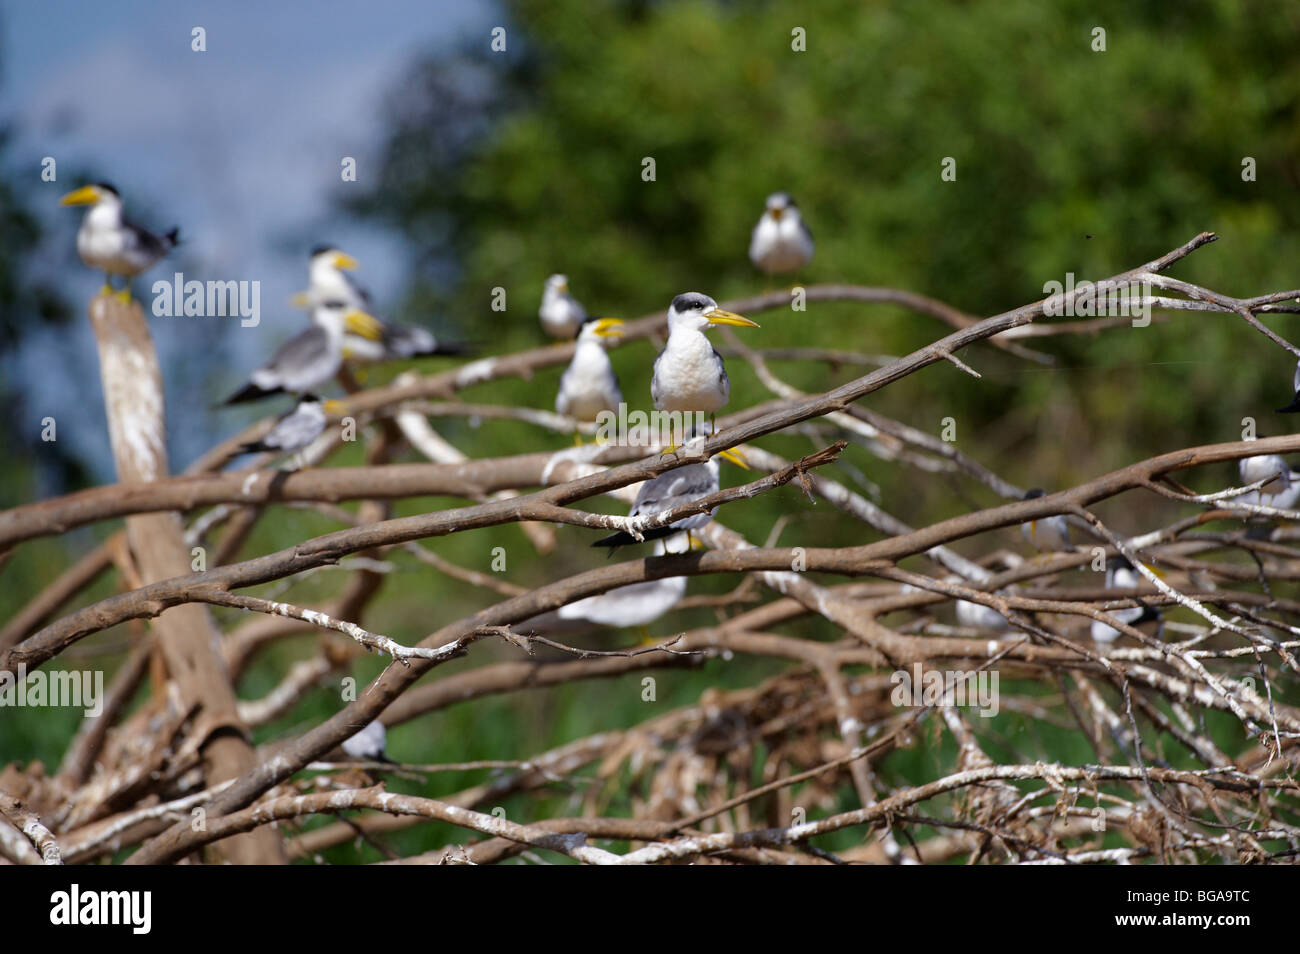 Yellow-billed Terns sitting on branches, Sternula superciliaris, PANTANAL, MATO GROSSO, Brasil, South America Stock Photo